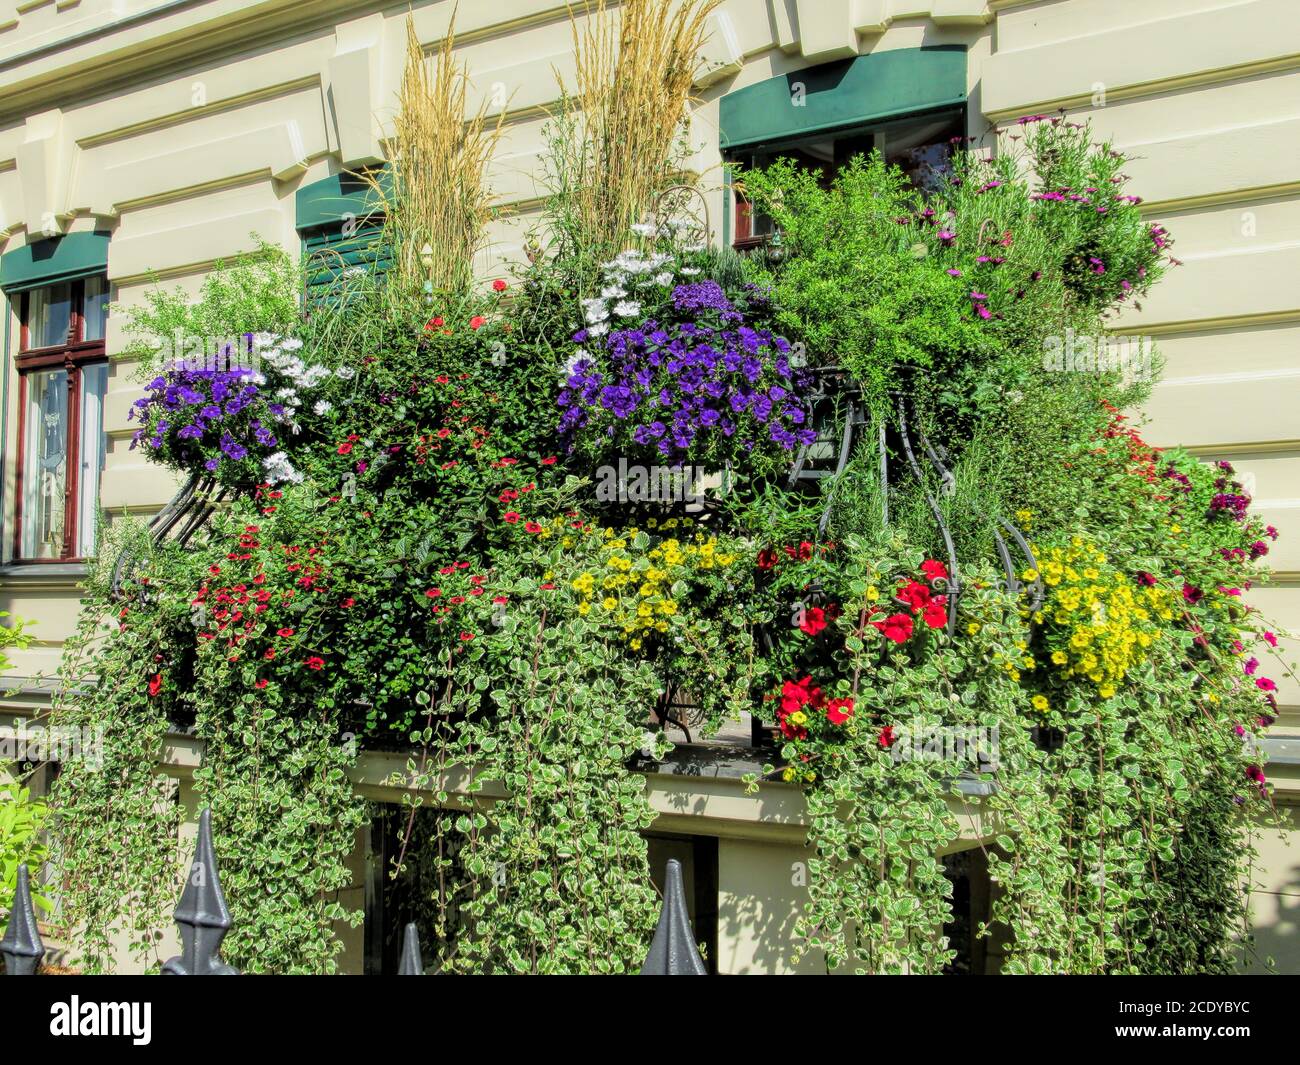 berlin, germany - 22.08.2019 - balcony on an old house with colorful flowers Stock Photo